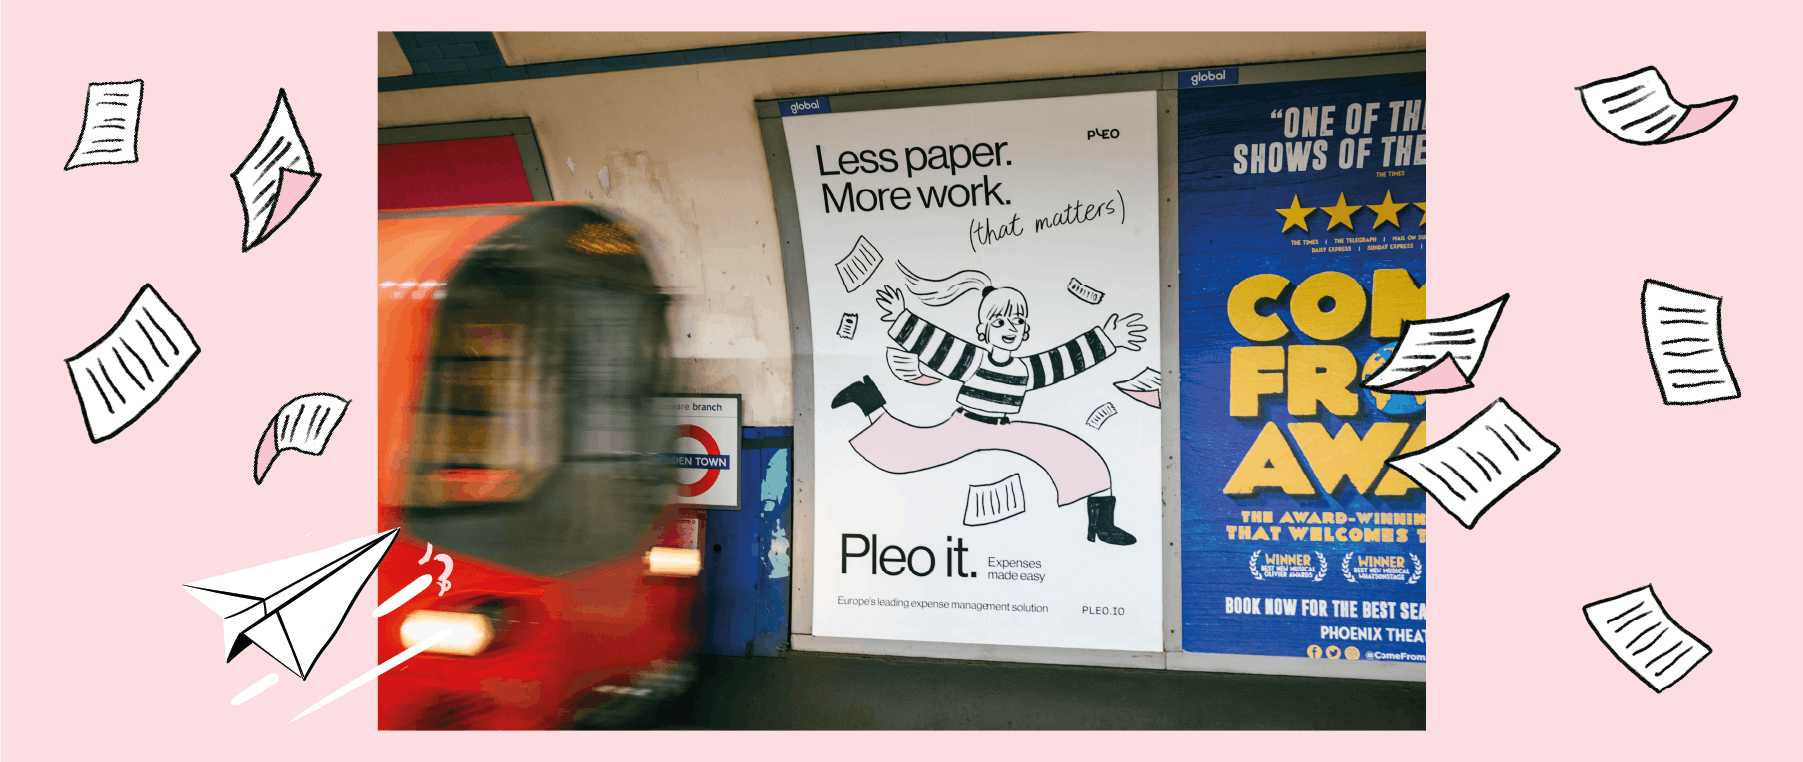 Pleo's out-of-home campaign on the London underground